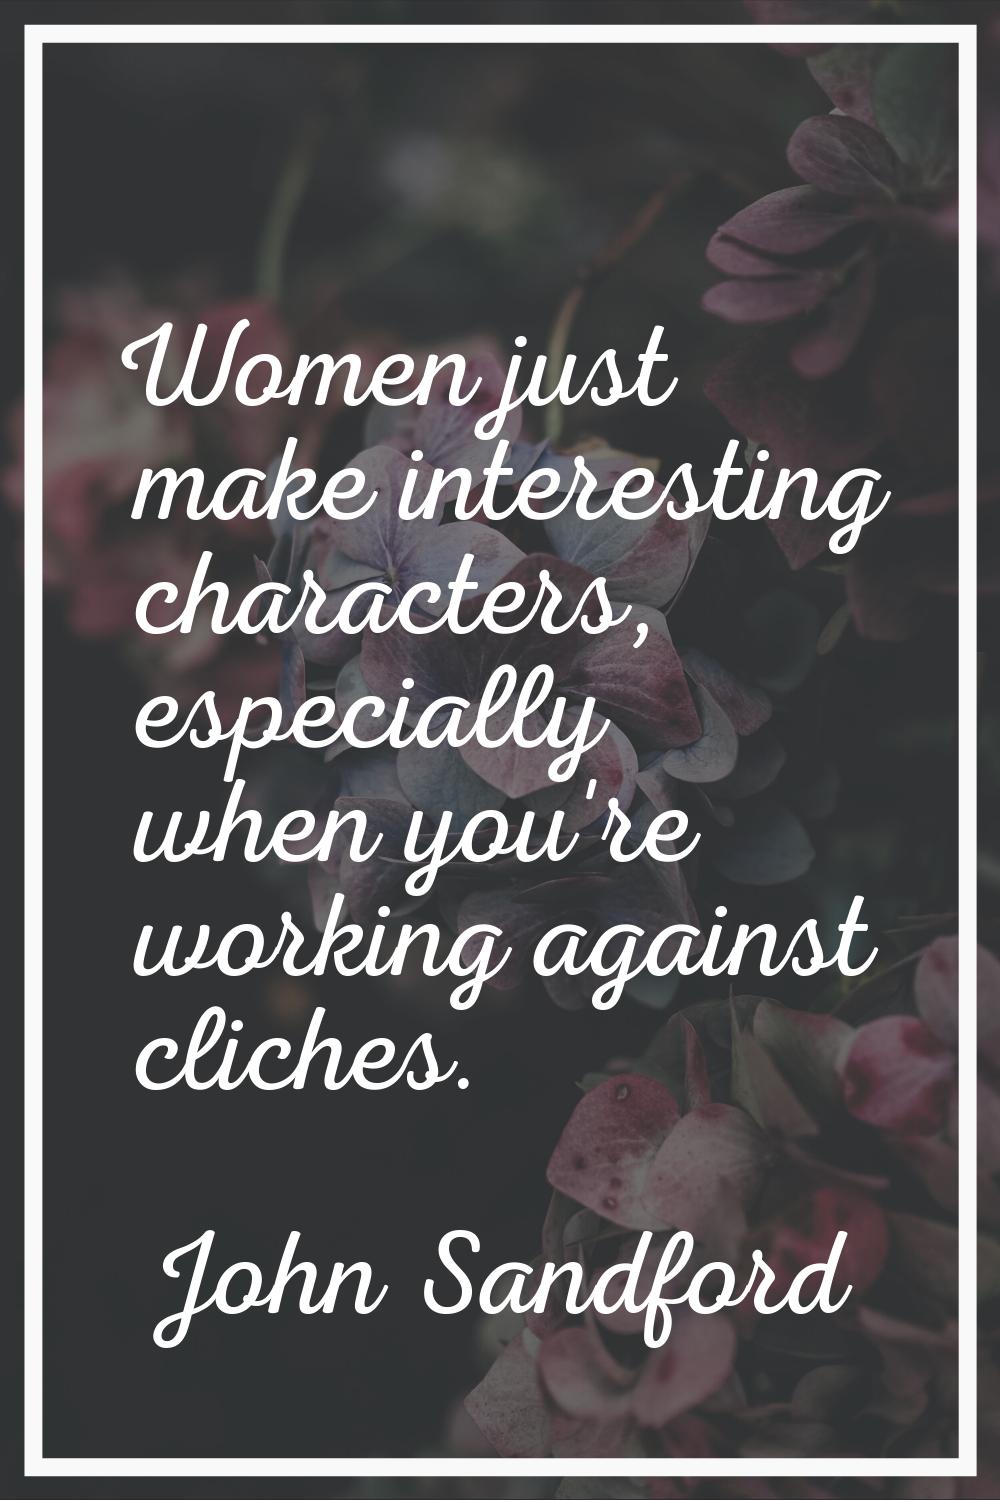 Women just make interesting characters, especially when you're working against cliches.